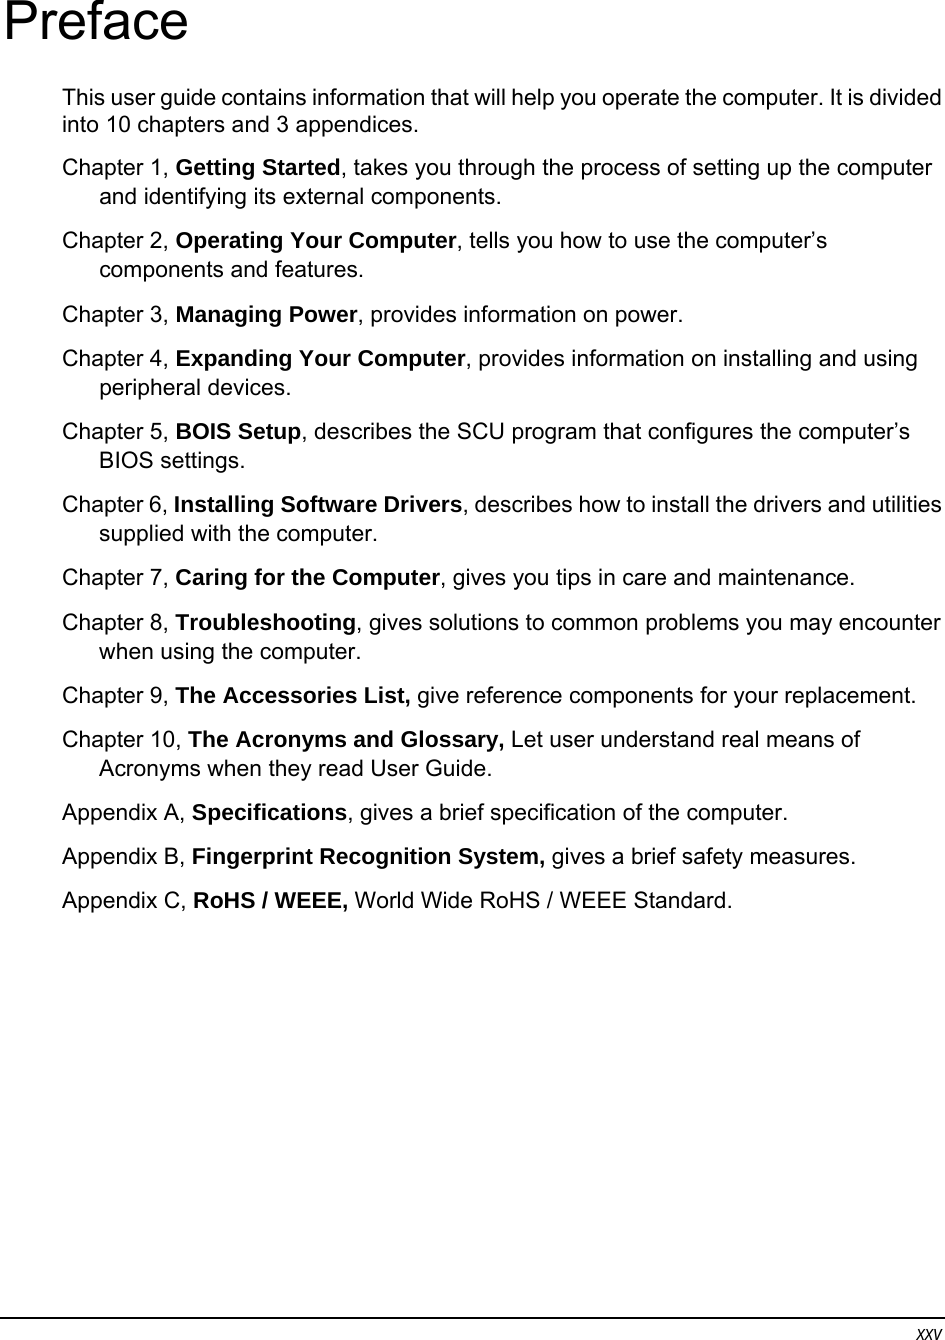 xxv Preface This user guide contains information that will help you operate the computer. It is divided into 10 chapters and 3 appendices. Chapter 1, Getting Started, takes you through the process of setting up the computer and identifying its external components. Chapter 2, Operating Your Computer, tells you how to use the computer’s components and features. Chapter 3, Managing Power, provides information on power. Chapter 4, Expanding Your Computer, provides information on installing and using peripheral devices. Chapter 5, BOIS Setup, describes the SCU program that configures the computer’s BIOS settings. Chapter 6, Installing Software Drivers, describes how to install the drivers and utilities supplied with the computer. Chapter 7, Caring for the Computer, gives you tips in care and maintenance. Chapter 8, Troubleshooting, gives solutions to common problems you may encounter when using the computer. Chapter 9, The Accessories List, give reference components for your replacement. Chapter 10, The Acronyms and Glossary, Let user understand real means of Acronyms when they read User Guide. Appendix A, Specifications, gives a brief specification of the computer. Appendix B, Fingerprint Recognition System, gives a brief safety measures. Appendix C, RoHS / WEEE, World Wide RoHS / WEEE Standard. 